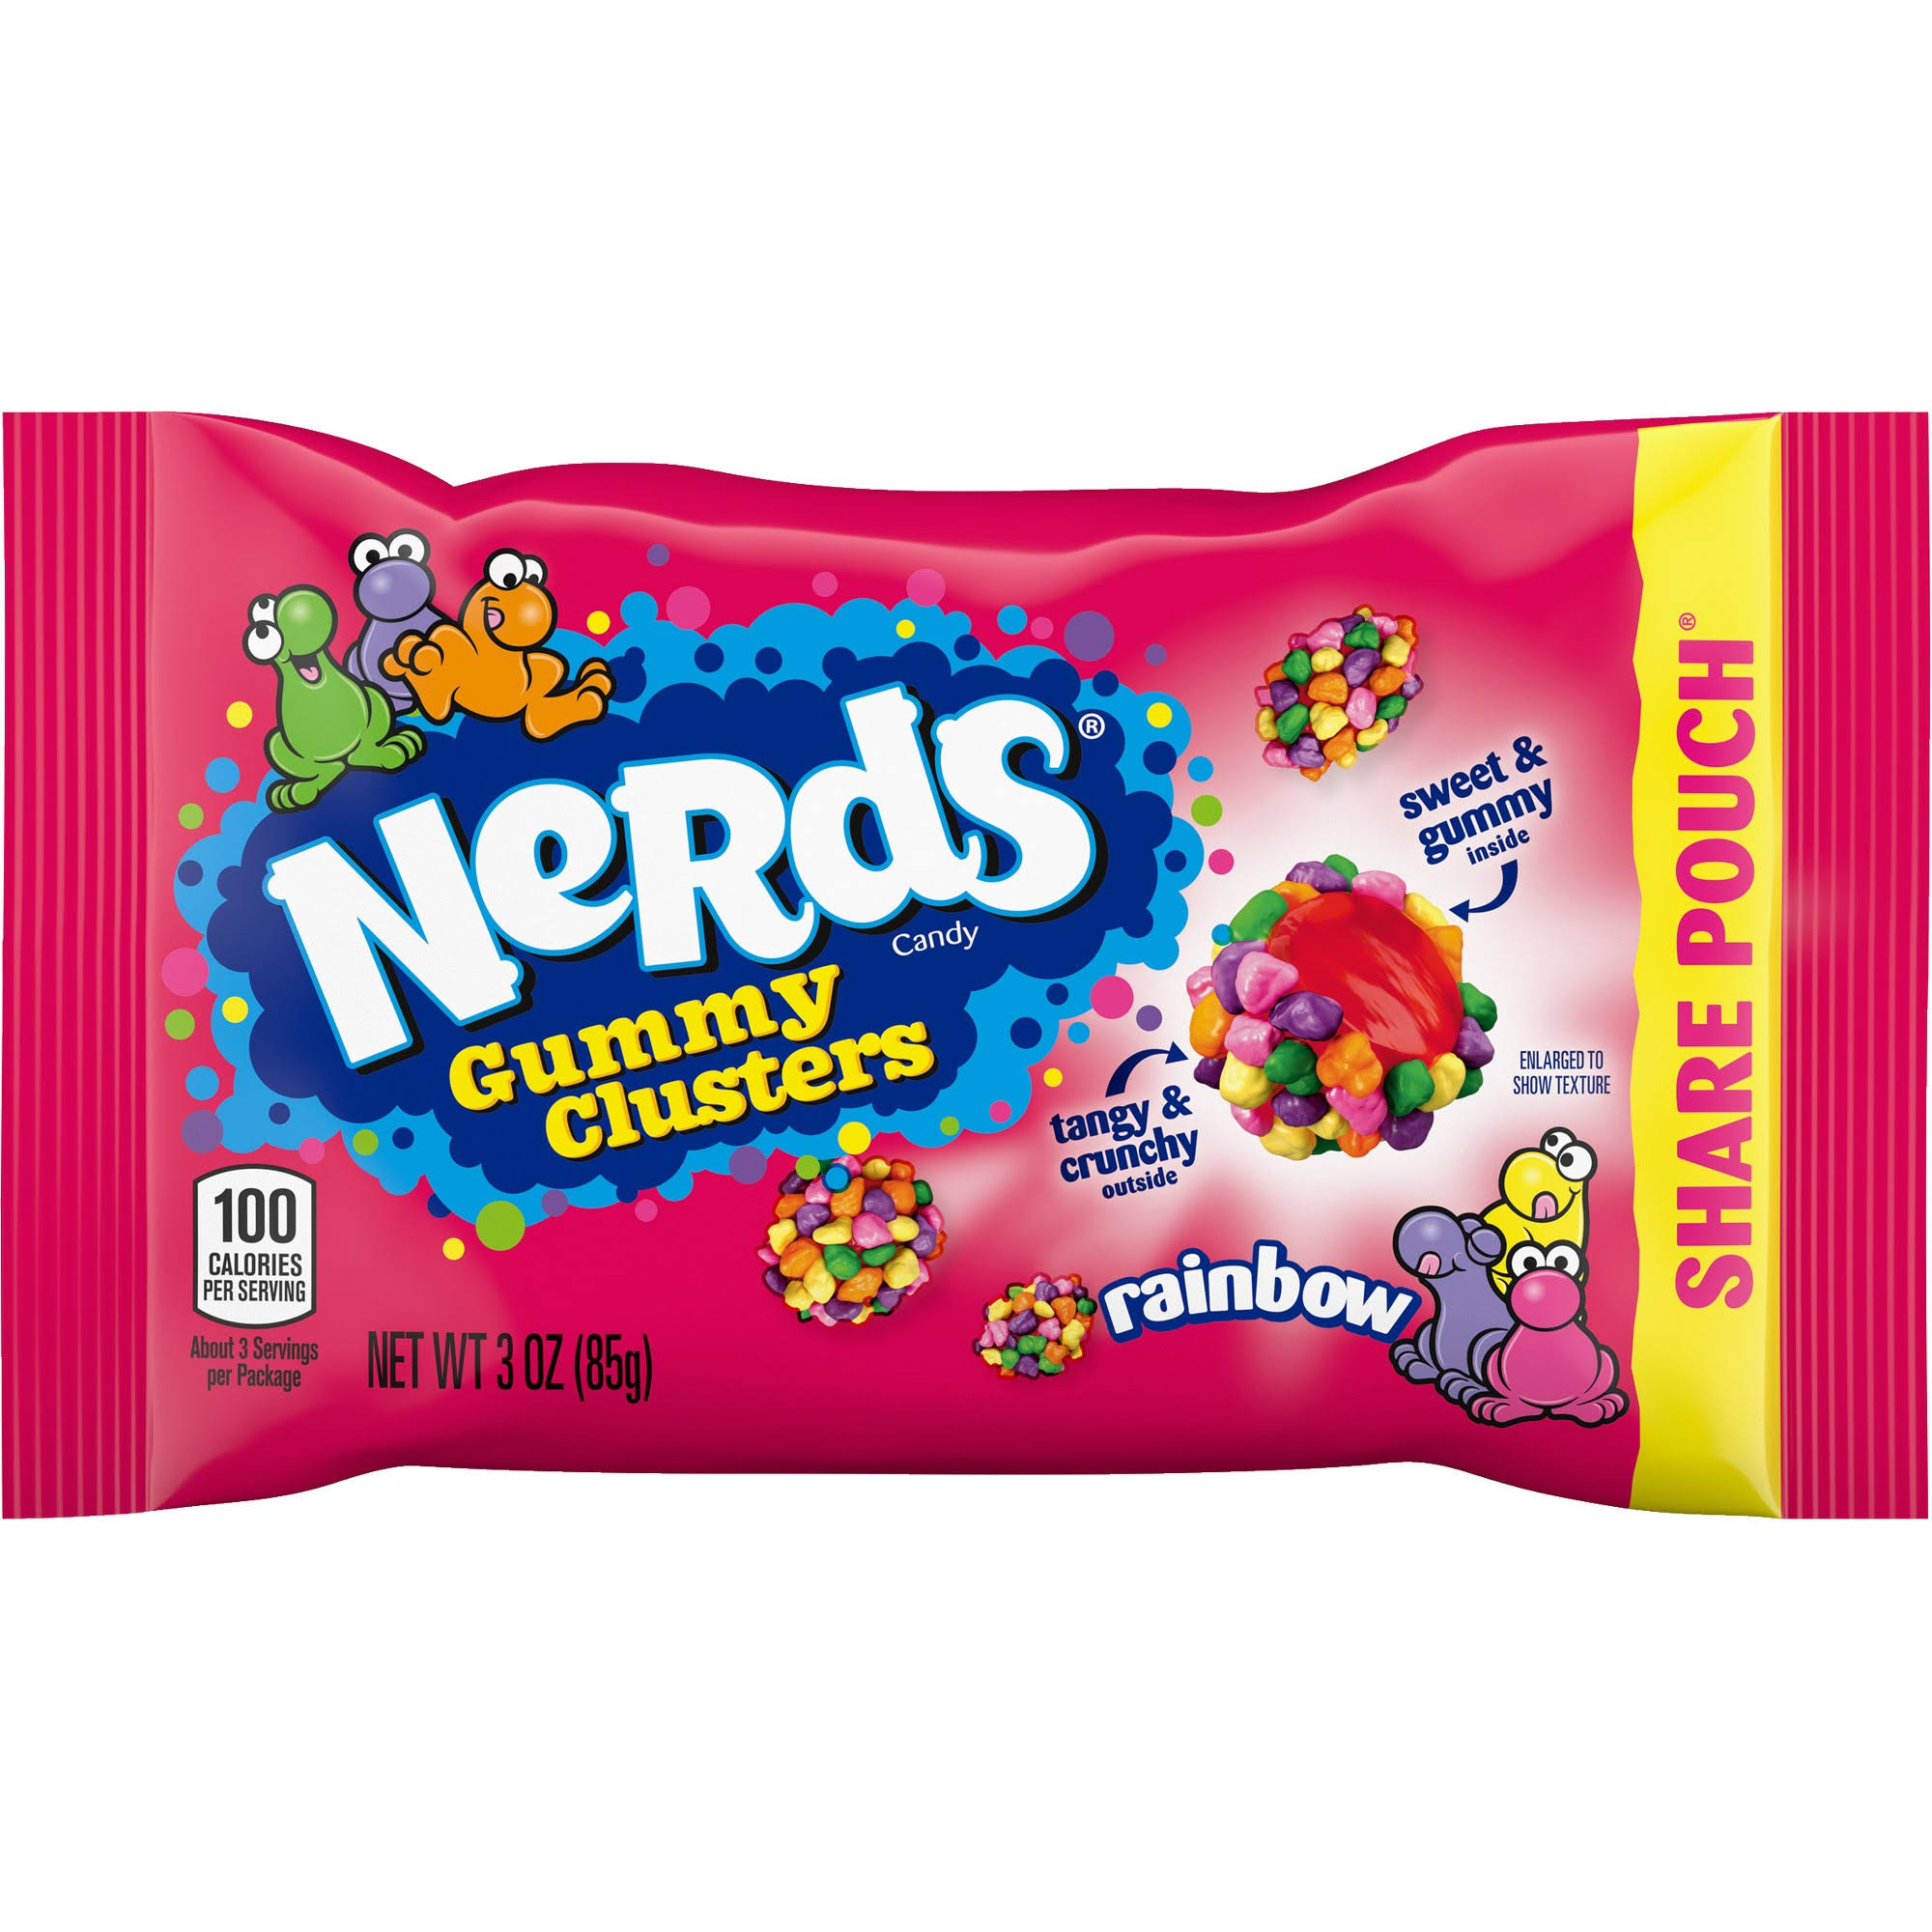 Nerds gummy clusters share pack, 3 oz